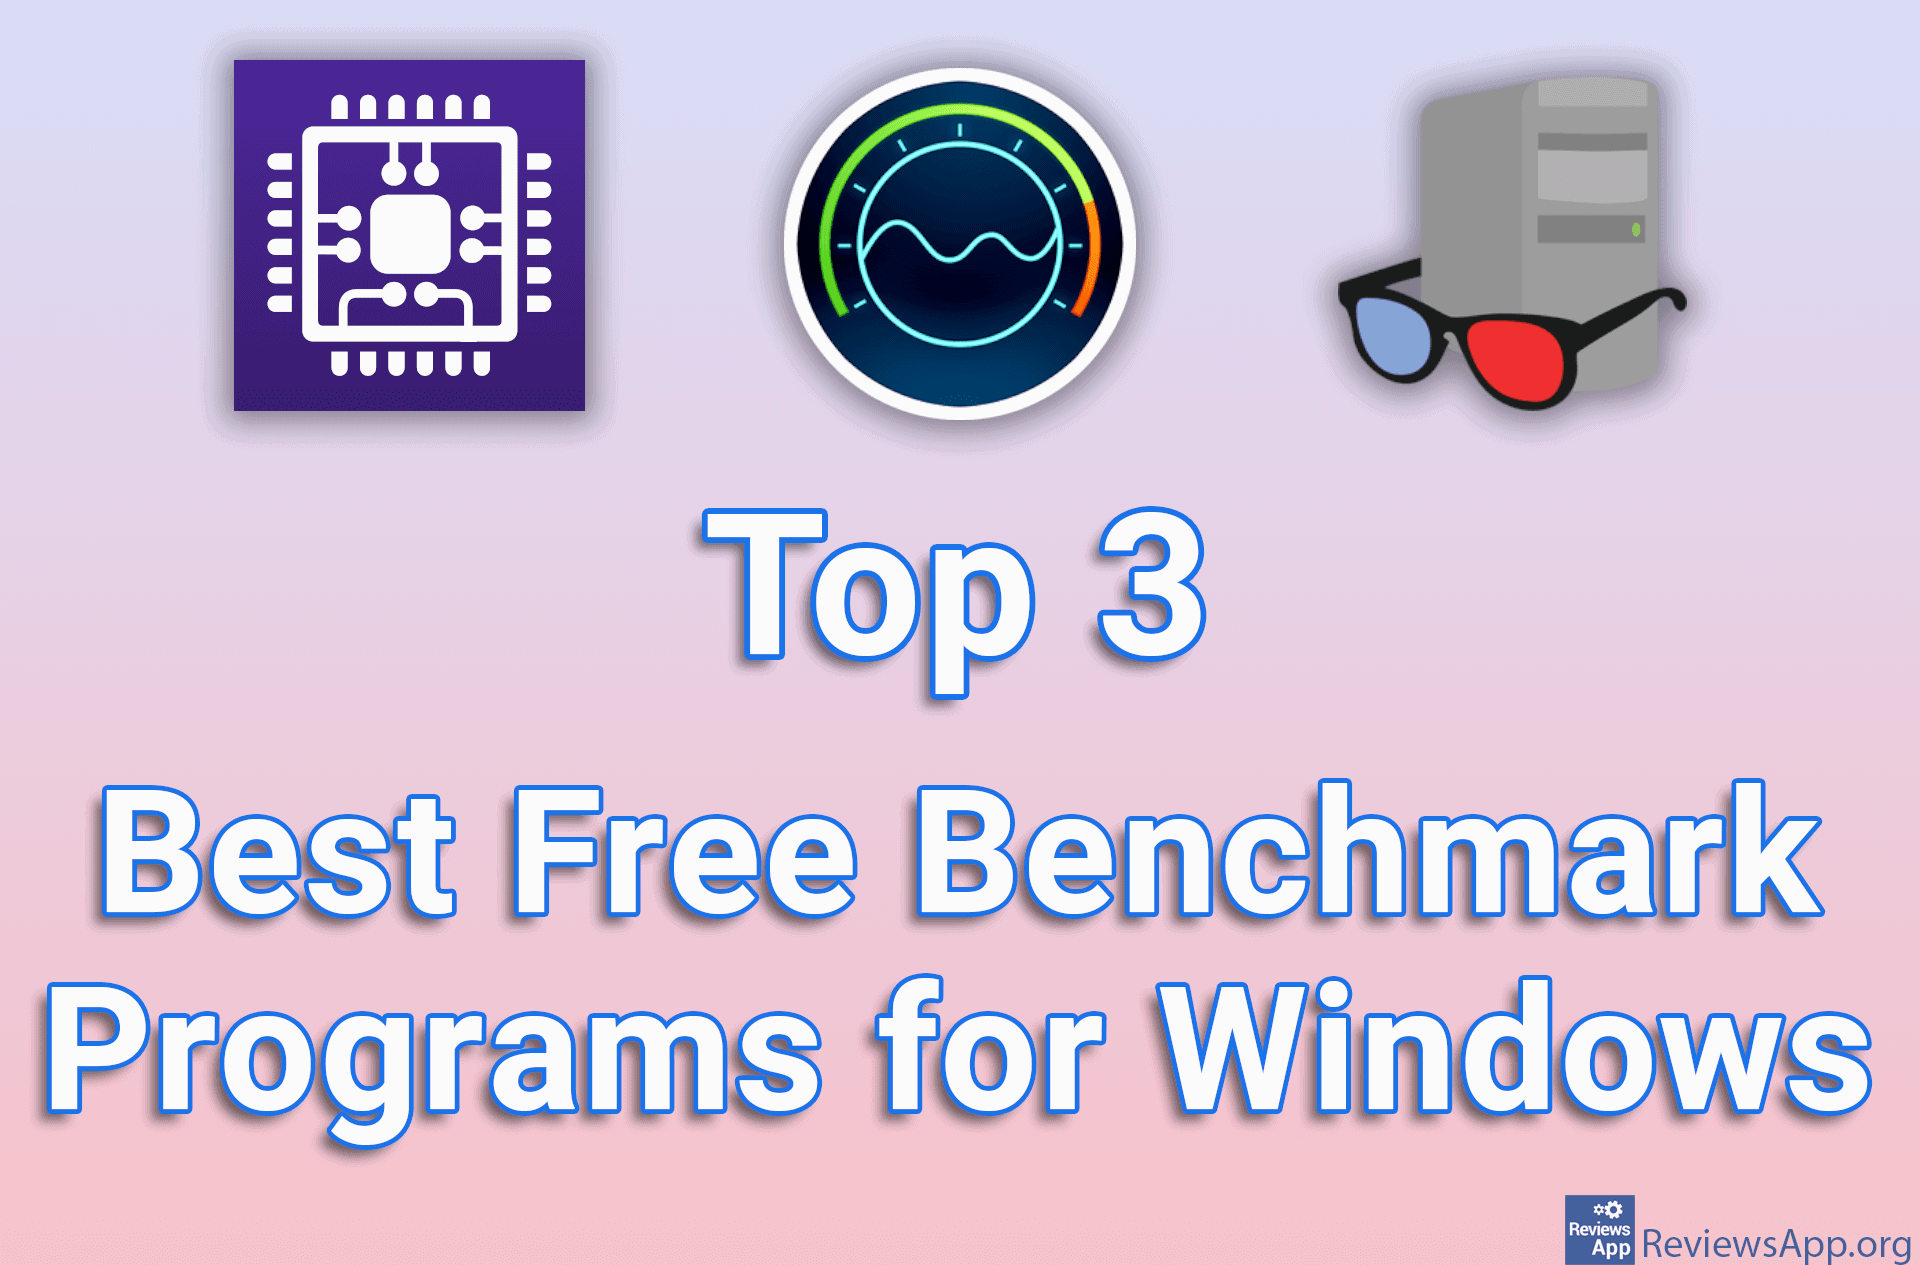 Top 3 Best Free Benchmark Programs for Windows